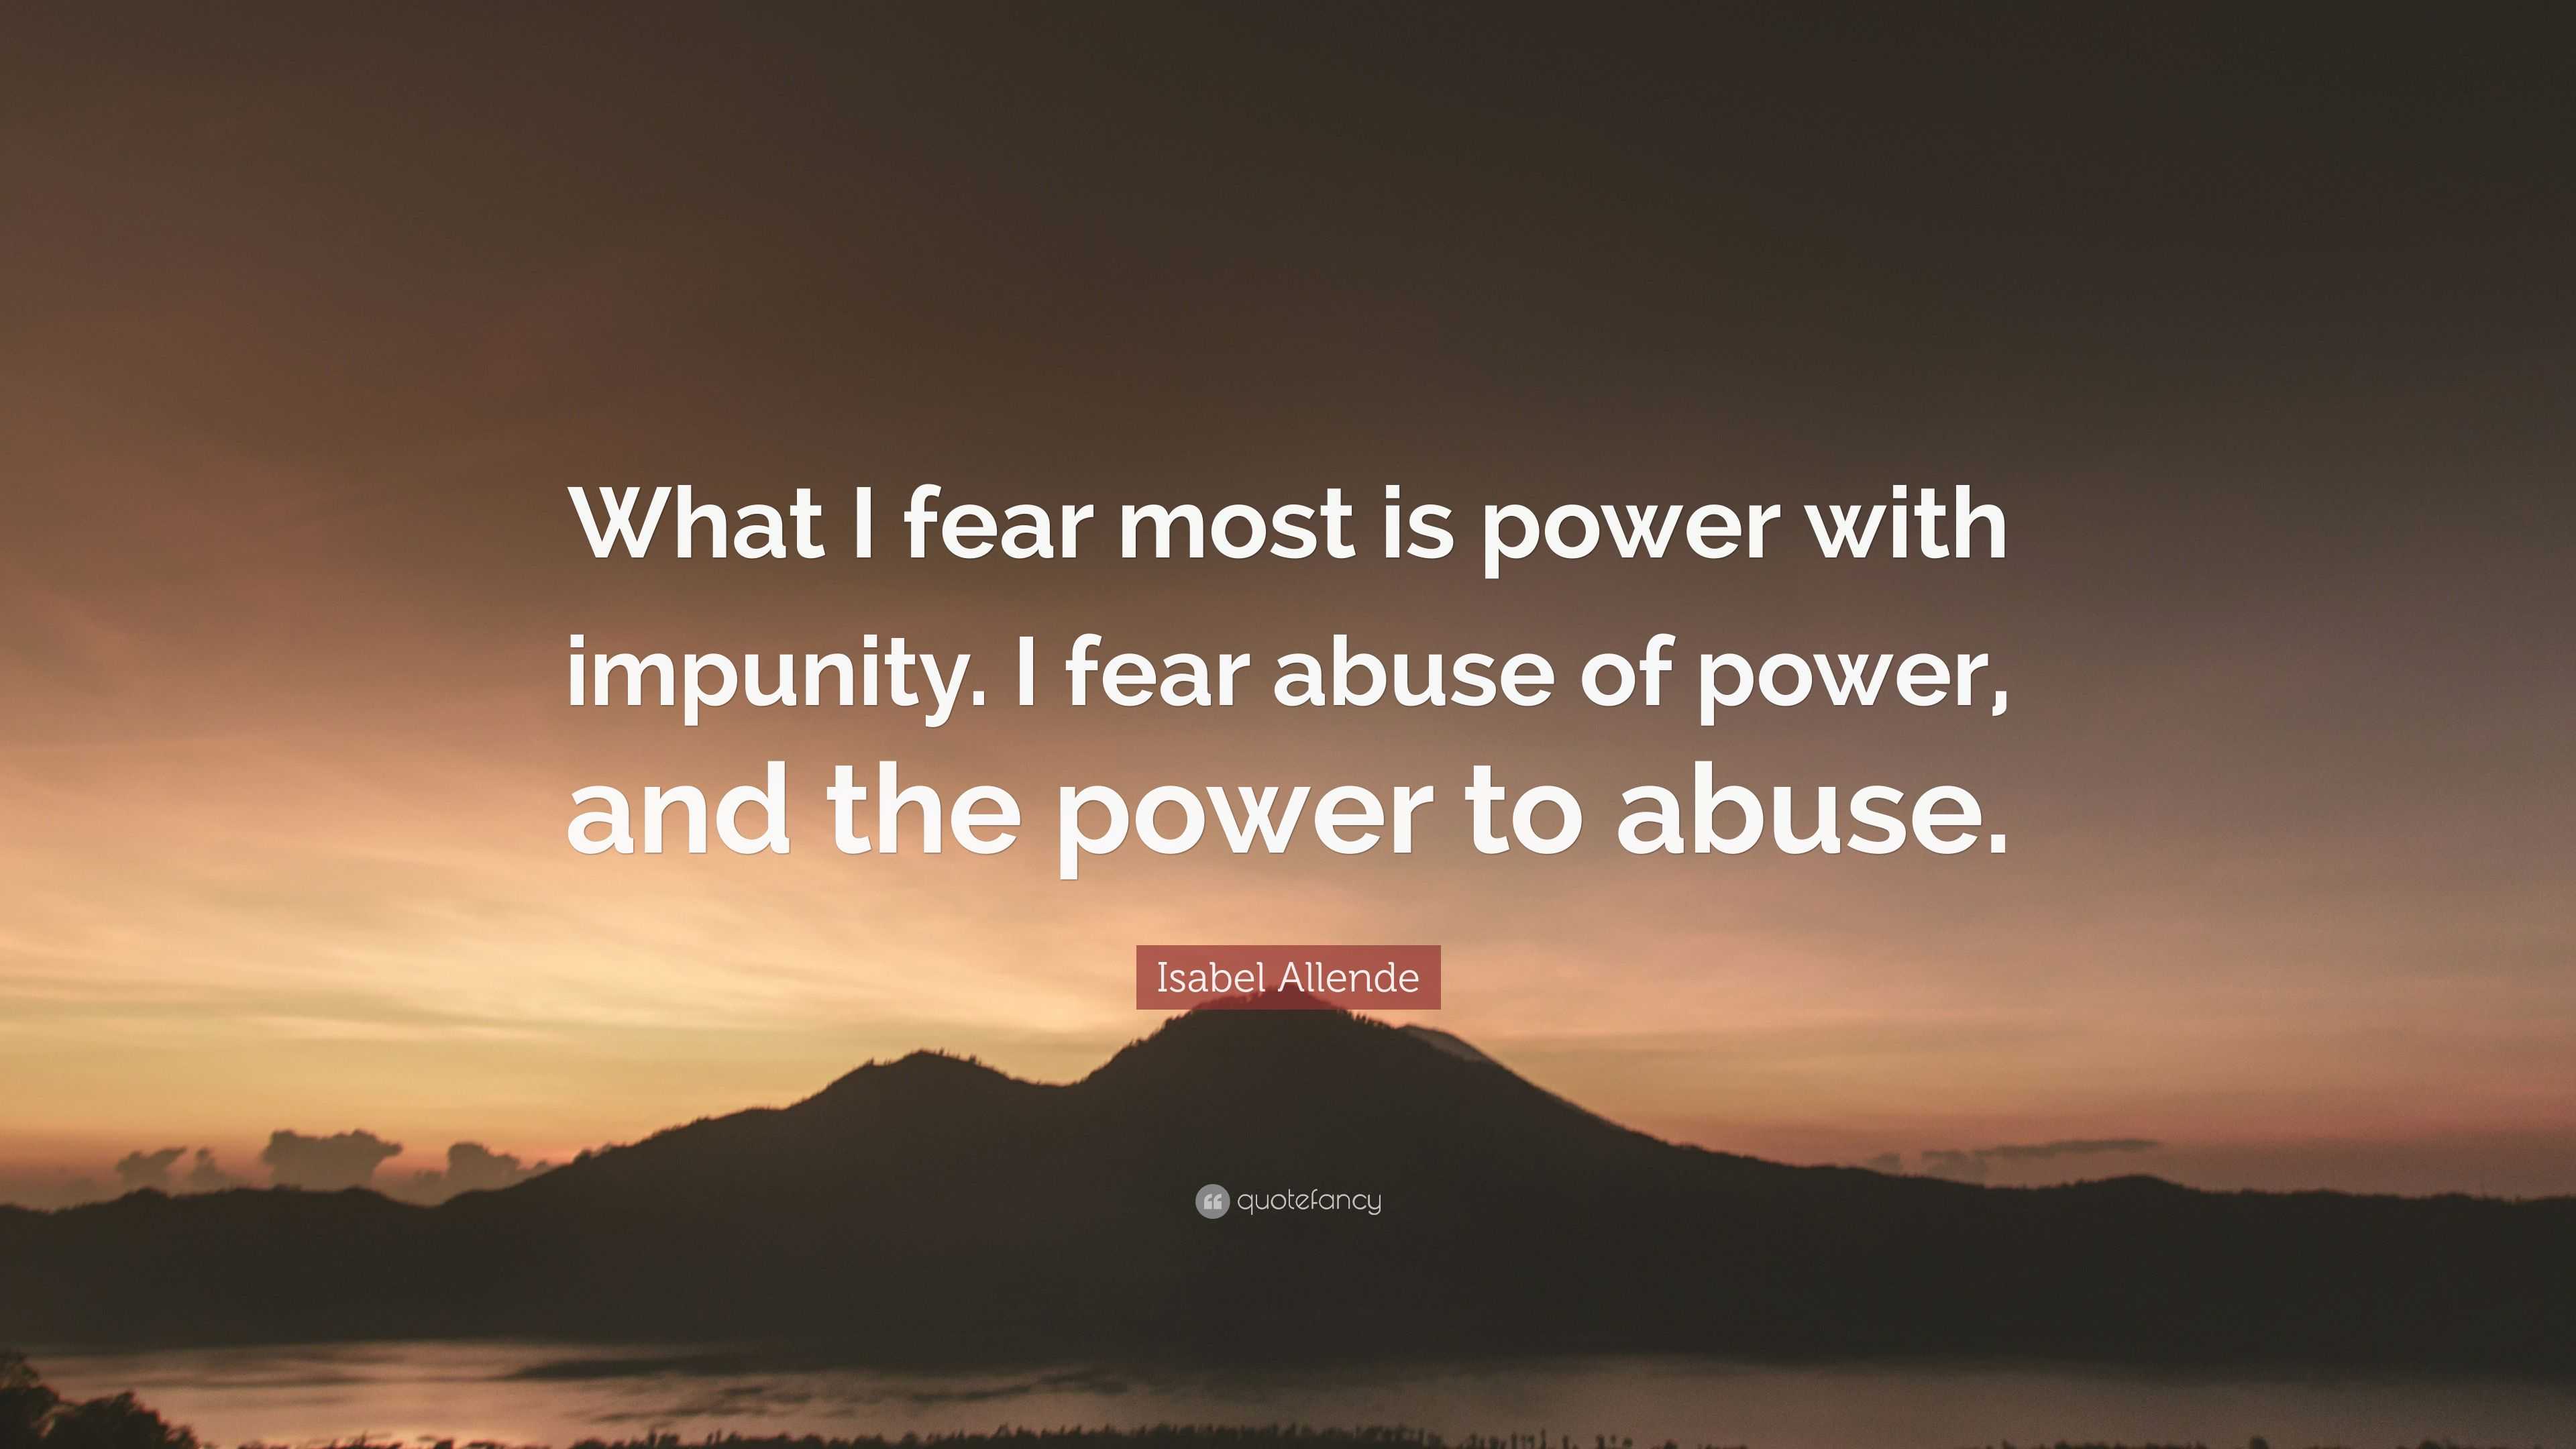 Isabel Allende Quote “What I fear most is power with